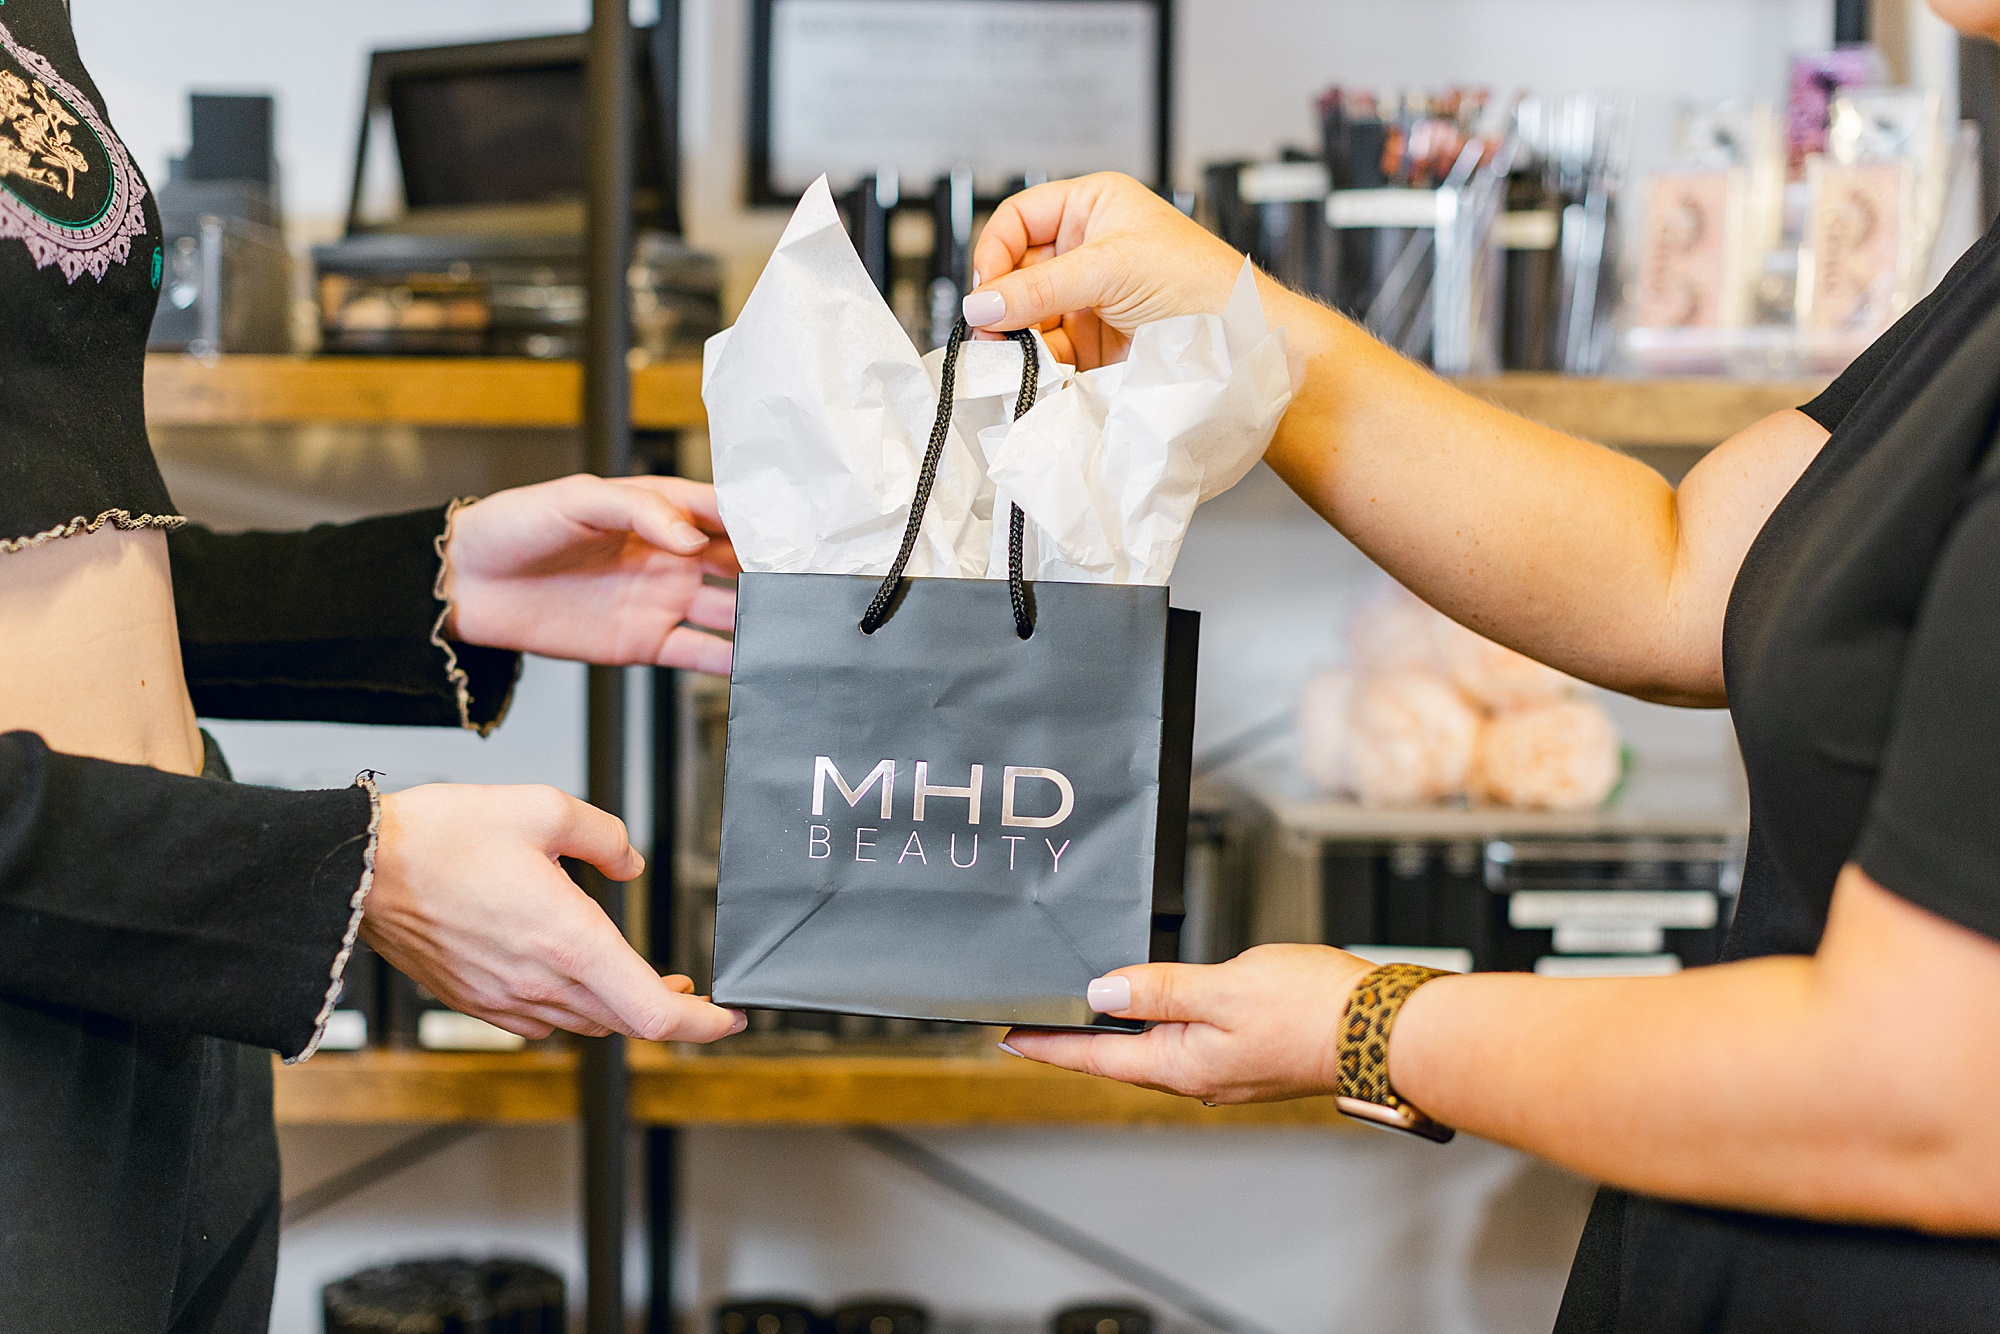 woman hands client a bag with MHD brand on the front